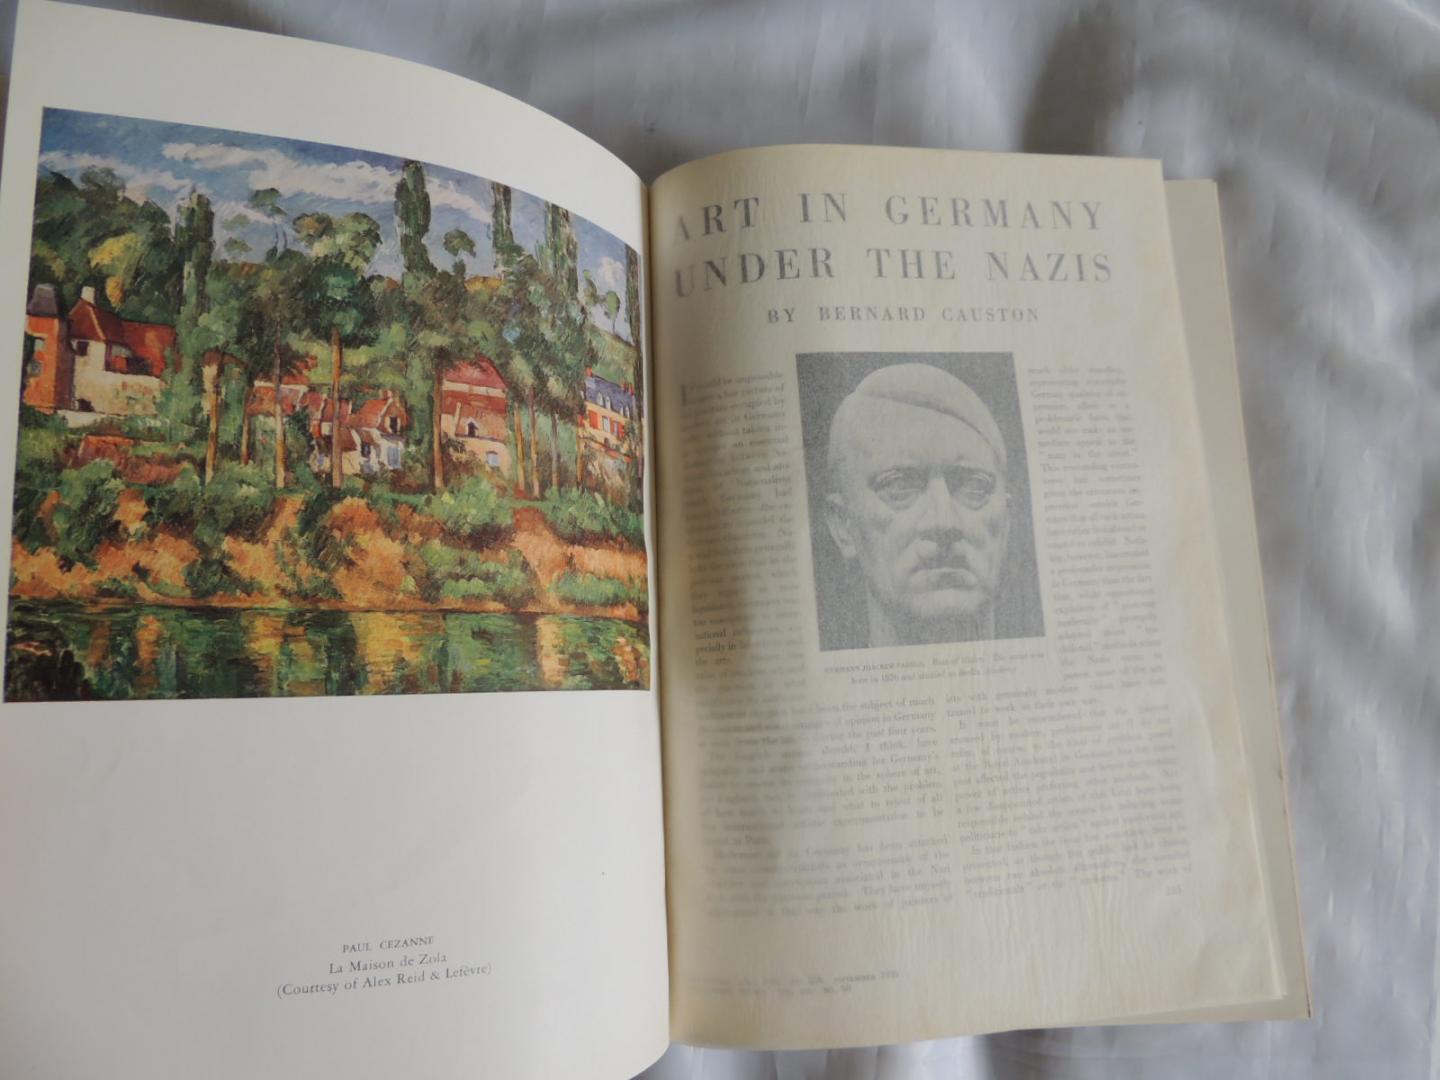 C. Geoffrey Holme (Editor) bernard causton - The Studio The Fine Arts Home Decoration and Design -1936 november volume CXII no. 524. Art in germany under the nazis -1939 December Christmas Greetings -1940 Januari 119 no. 562 Februari 563. March 564. April 565. May .WEDGWOOD POTTERIES pottery